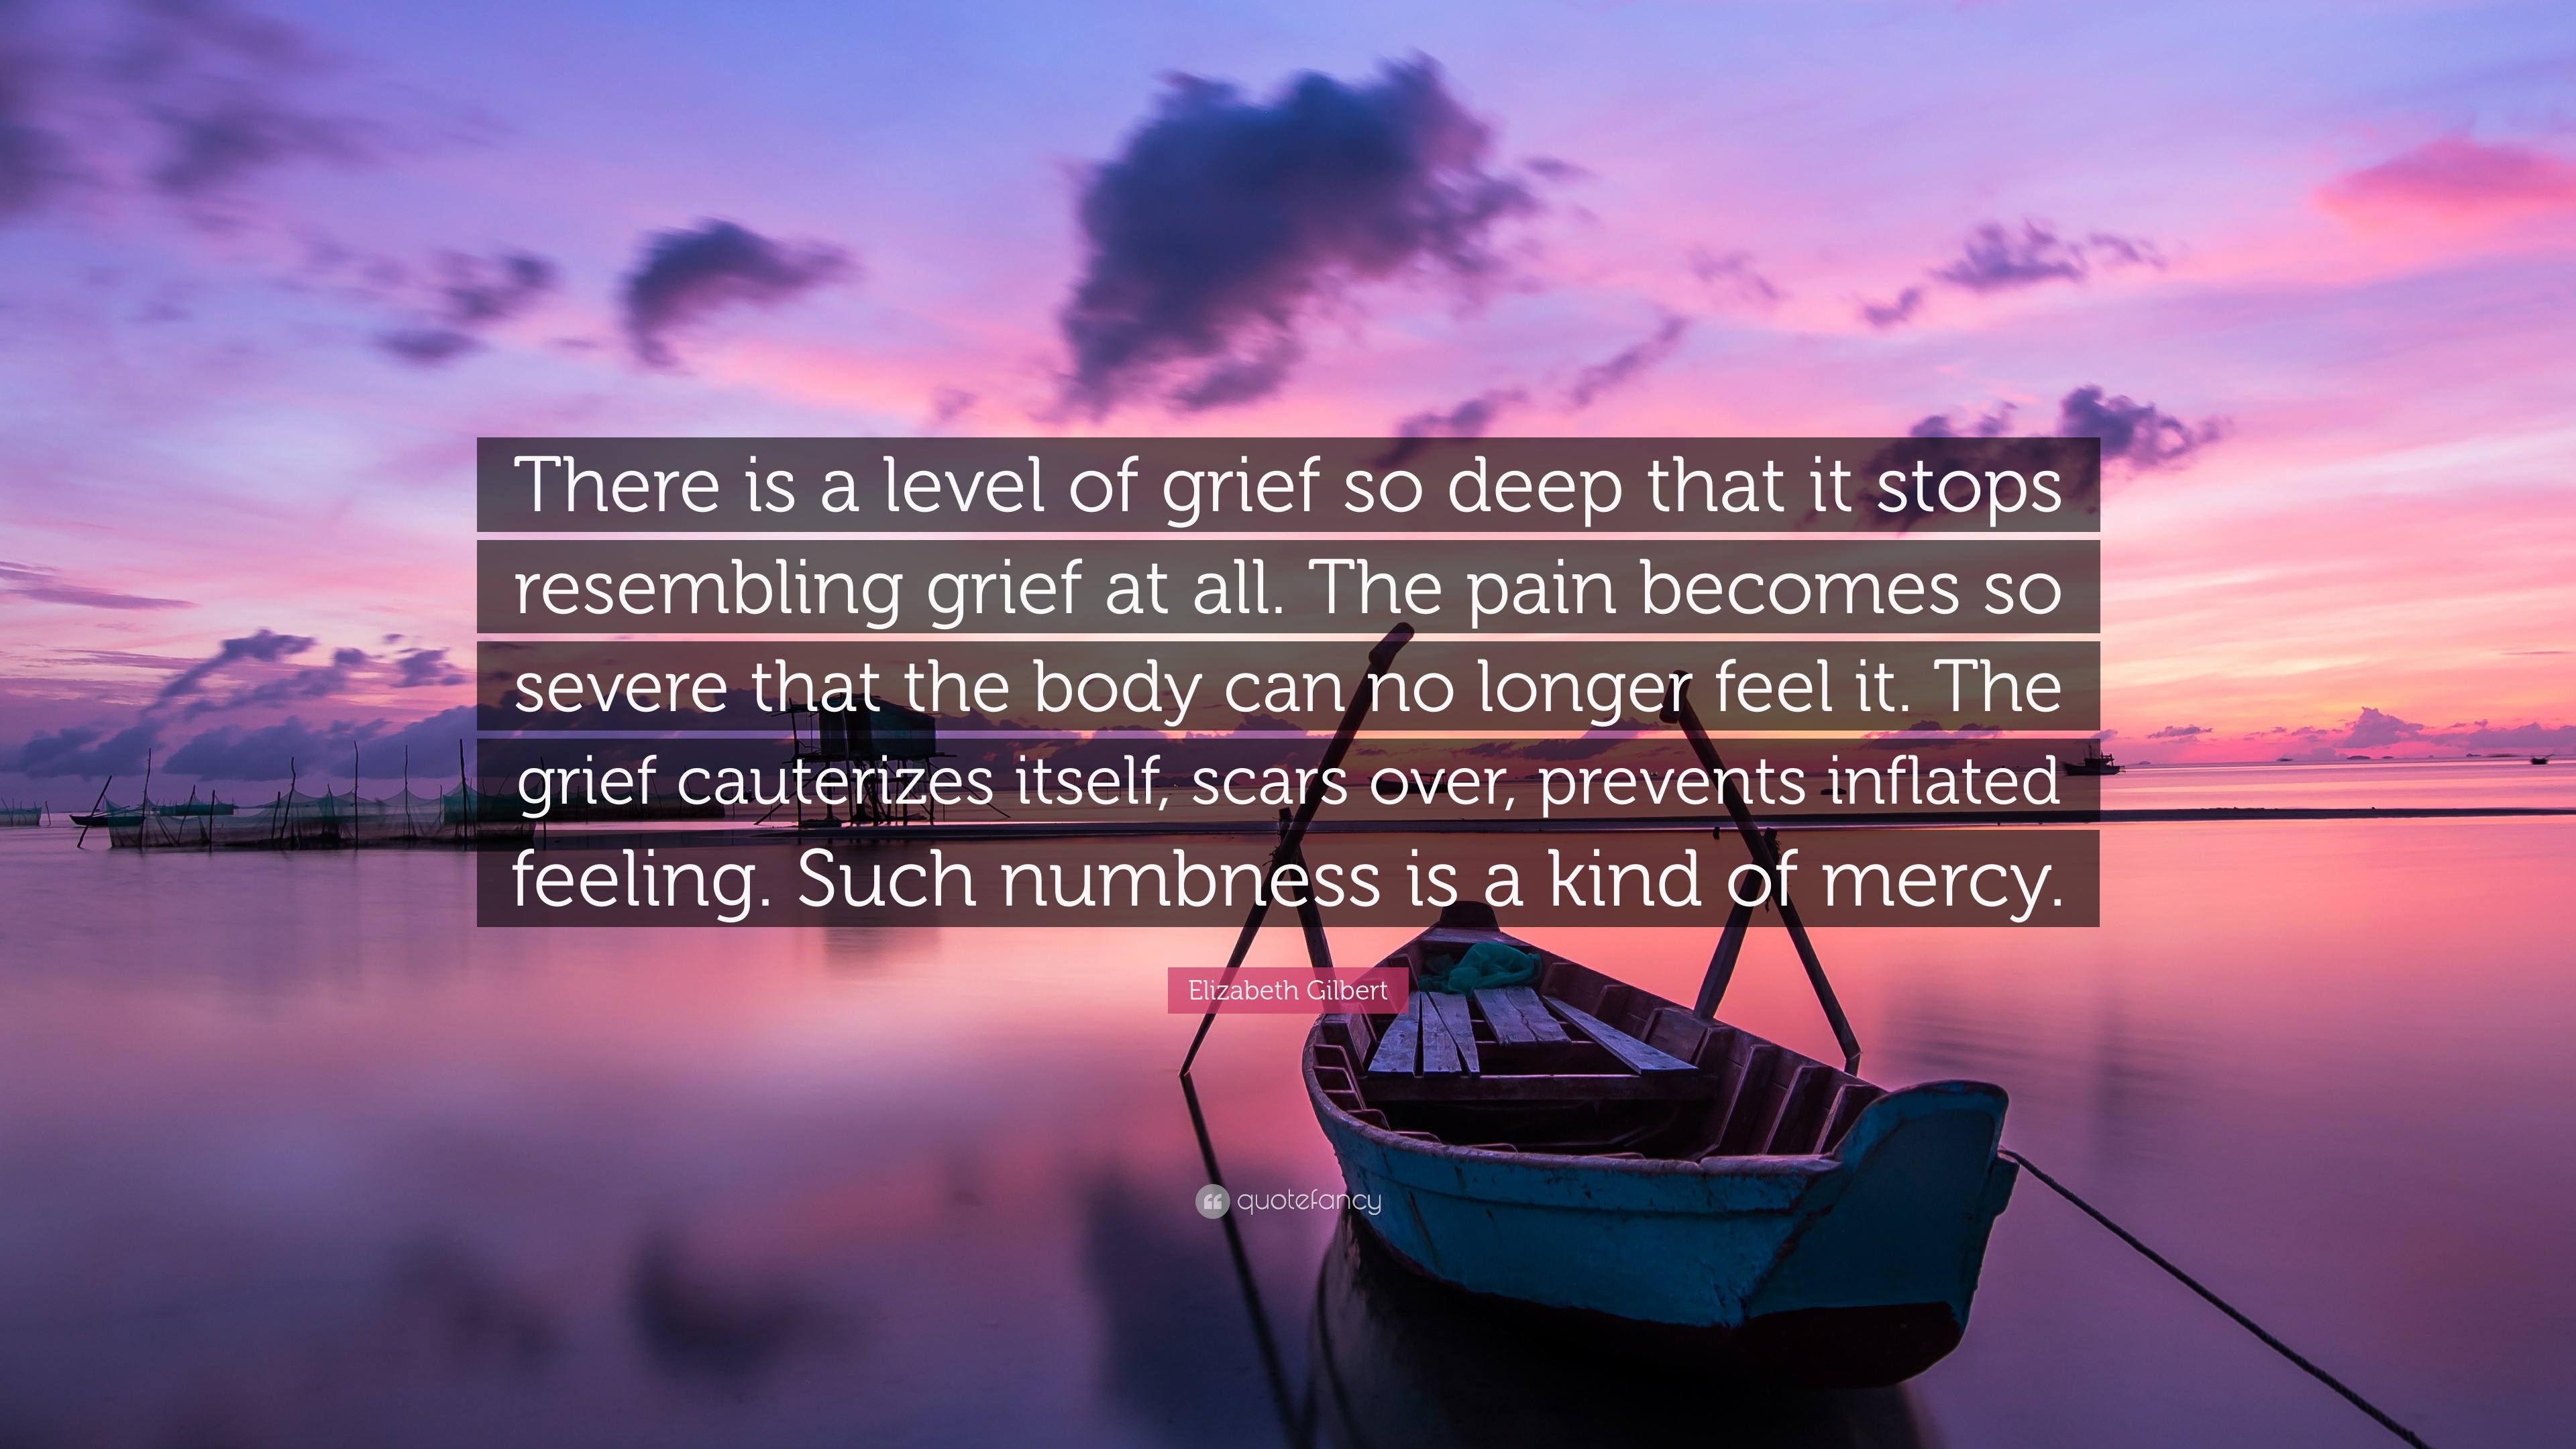 Elizabeth Gilbert Quote: “There is a level of grief so deep that it